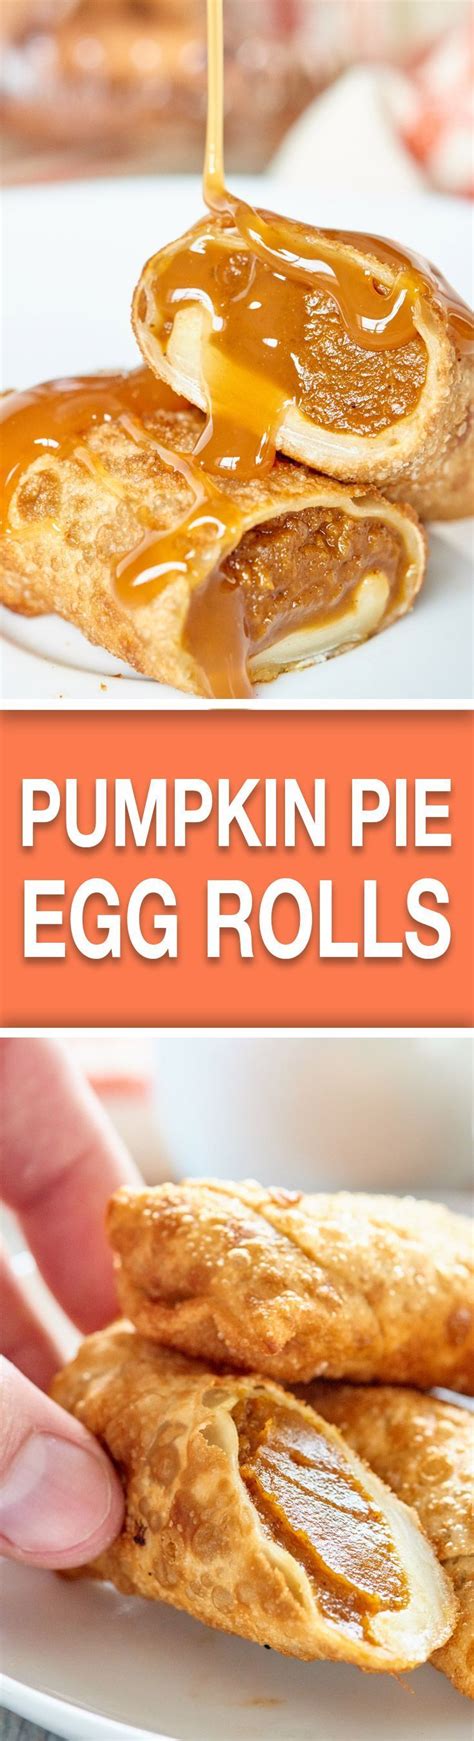 So what do you do with all those eggs, well cook with them of course. Pumpkin Pie Egg Rolls | Recipe | Pumpkin recipes, Food ...